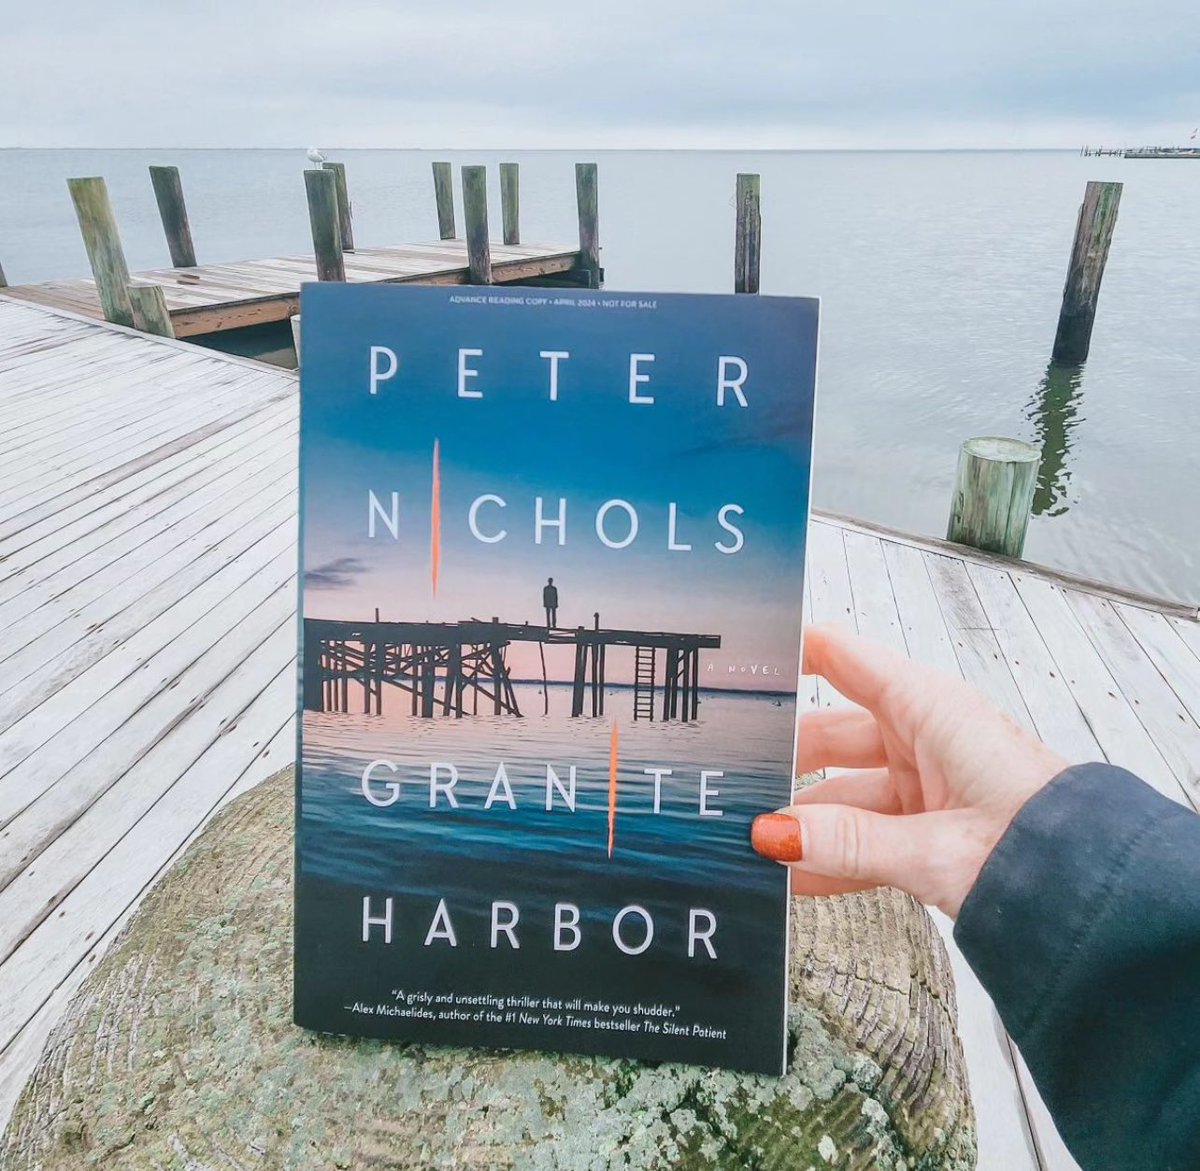 The creepiest book you’ll read this year? GRANITE HARBOR 😱 “I could NOT put this book down...it was such a fun, creepy and thrilling read!” —Tiffany, Goodreads reviewer` Coming April 30. Tag a thriller/horror lover in the comments! #GraniteHarbor